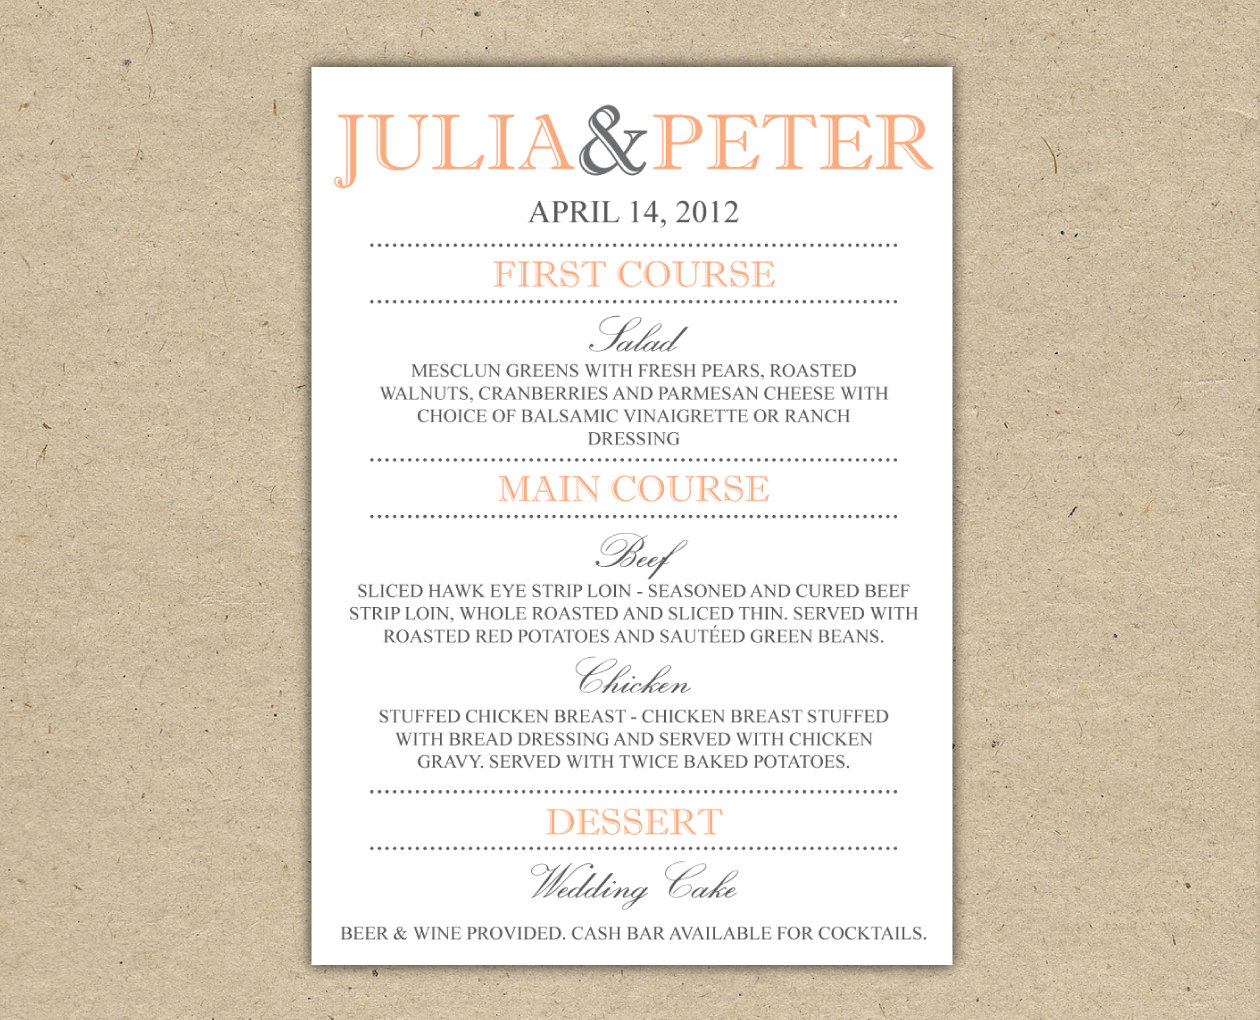 20 Dinner Menu Templates Free Images - Printable Weekly Dinner Throughout Free Wedding Menu Template For Word